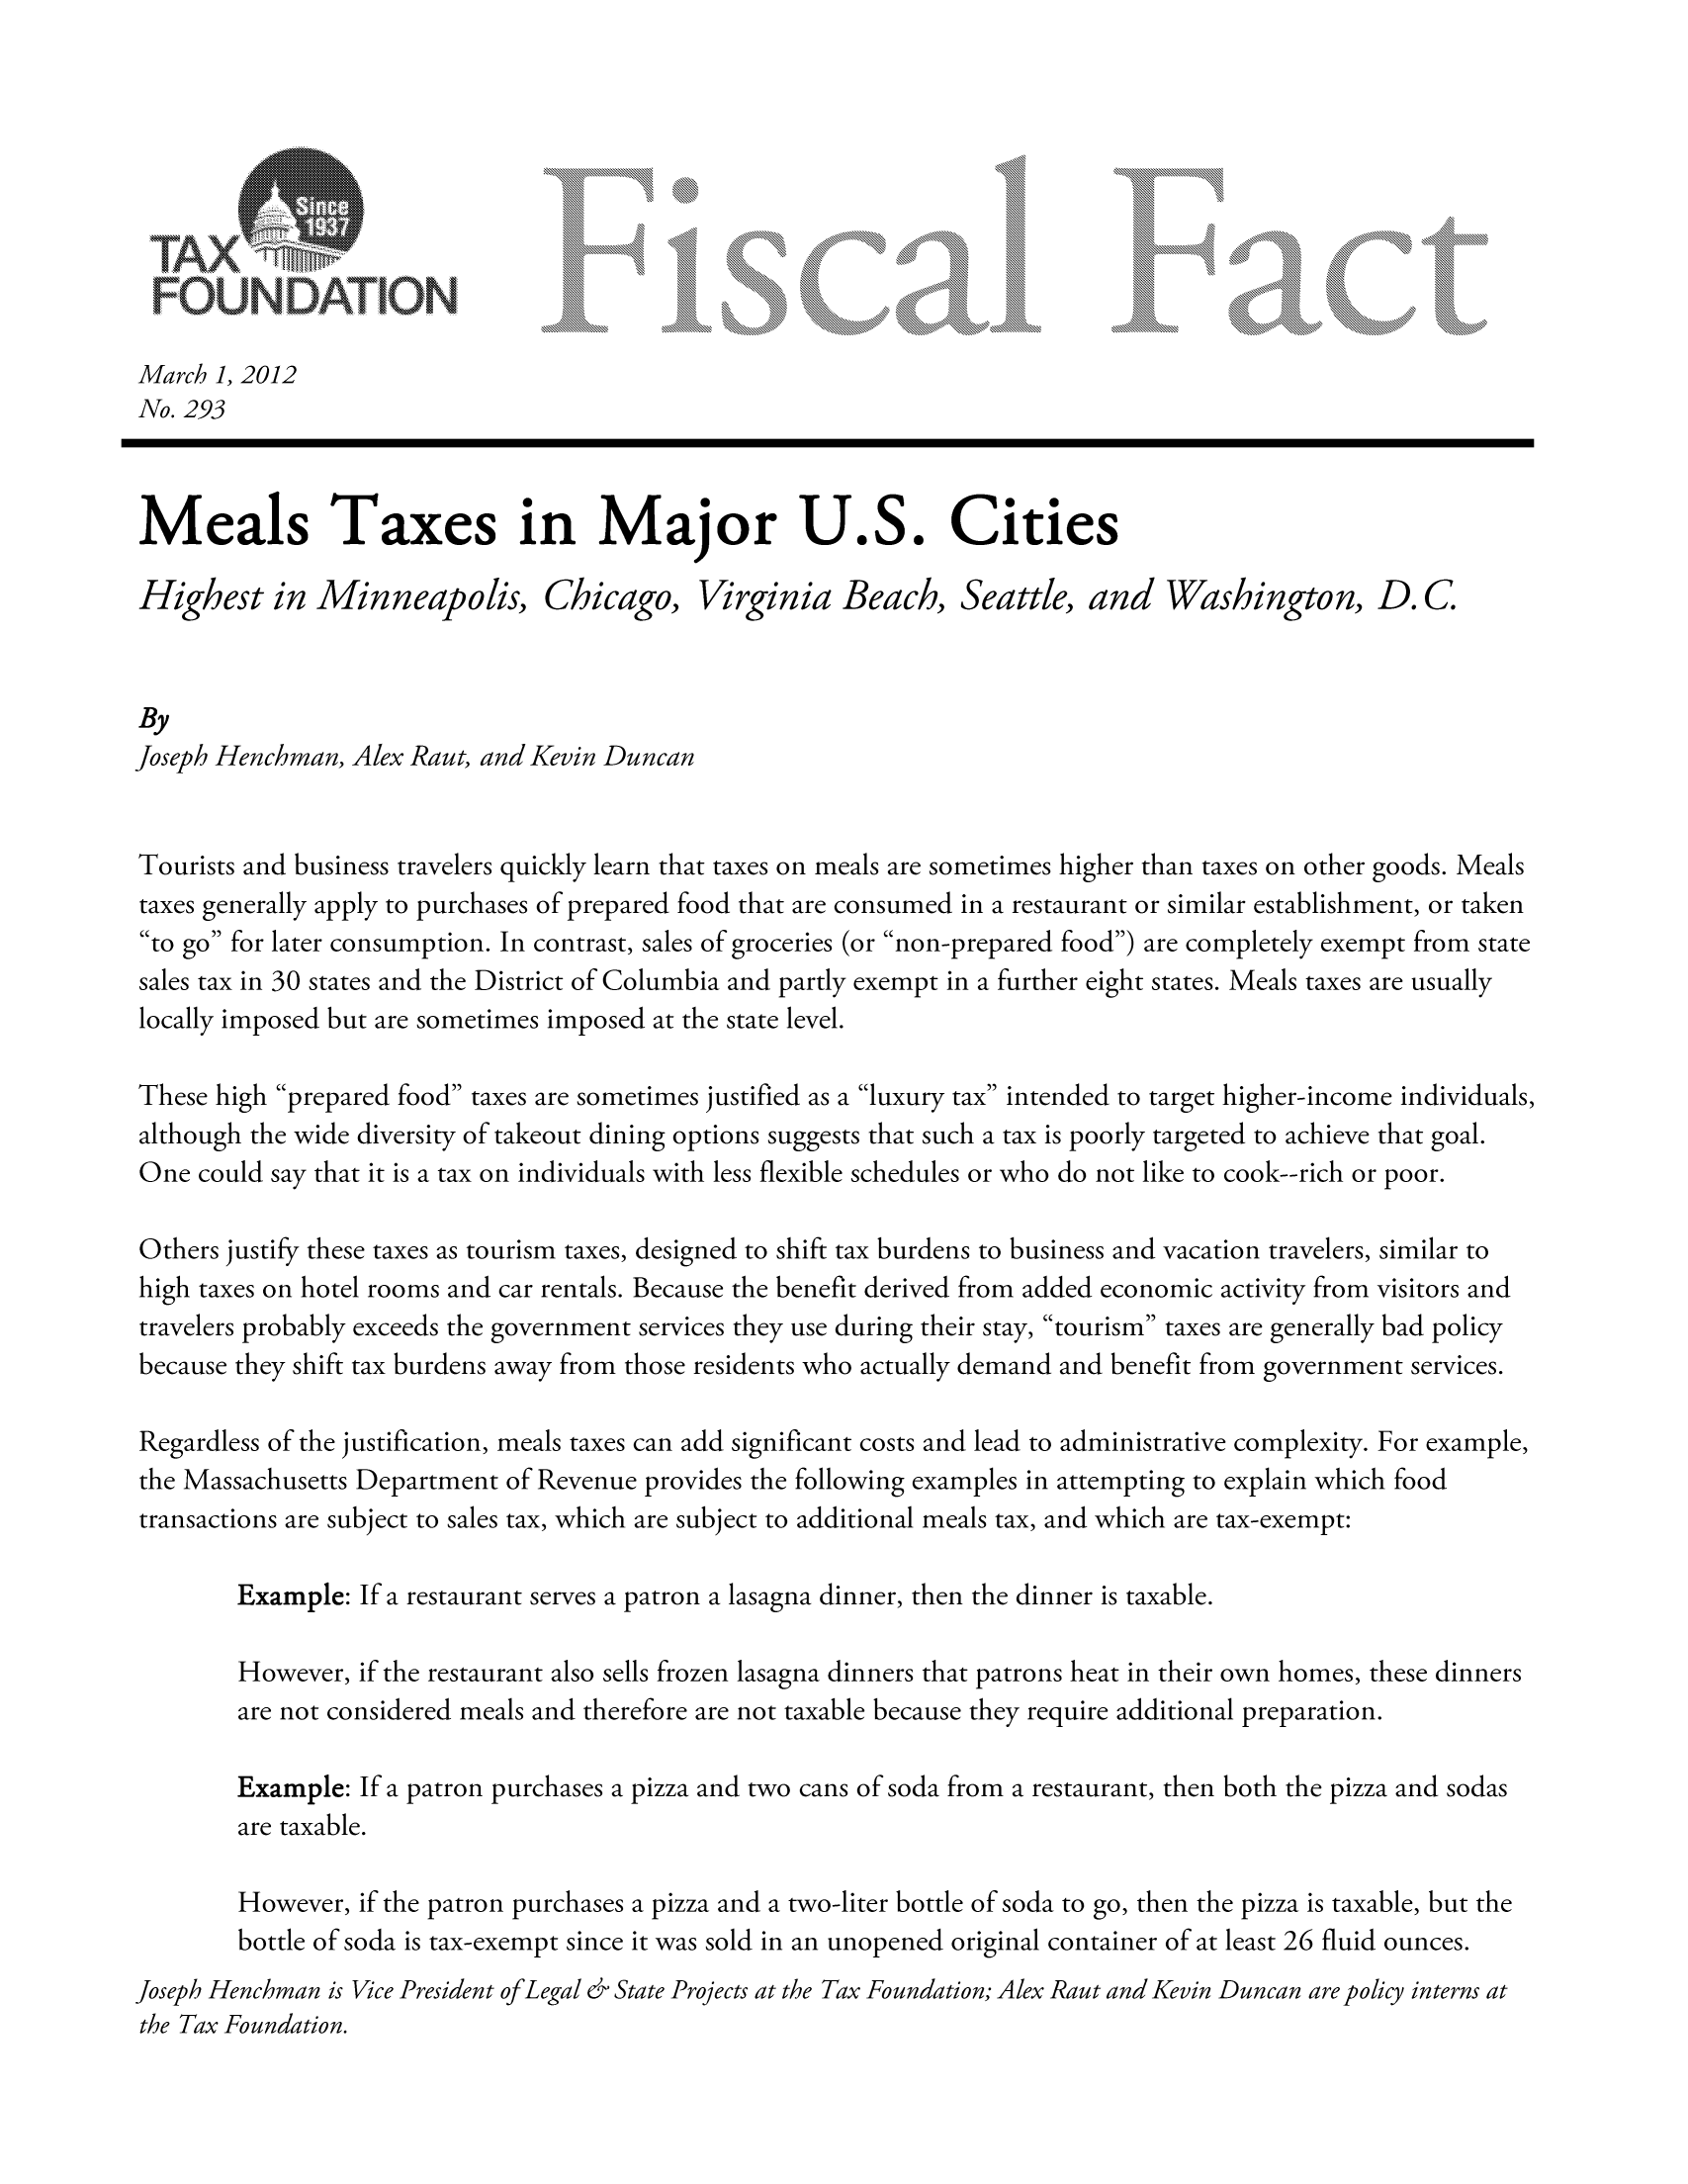 handle is hein.taxfoundation/ffcjdxz0001 and id is 1 raw text is: March 1, 2012
No. 293
Meals Taxes in Major U.S. Cities
Highest in Minneapolis, Chicago, Virginia Beach, Seattle, and Washington, D.C
By
Joseph Henchman, Alex Rant, and Kevin Duncan
Tourists and business travelers quickly learn that taxes on meals are sometimes higher than taxes on other goods. Meals
taxes generally apply to purchases of prepared food that are consumed in a restaurant or similar establishment, or taken
to go for later consumption. In contrast, sales of groceries (or non-prepared food) are completely exempt from state
sales tax in 30 states and the District of Columbia and partly exempt in a further eight states. Meals taxes are usually
locally imposed but are sometimes imposed at the state level.
These high prepared food taxes are sometimes justified as a luxury tax intended to target higher-income individuals,
although the wide diversity of takeout dining options suggests that such a tax is poorly targeted to achieve that goal.
One could say that it is a tax on individuals with less flexible schedules or who do not like to cook--rich or poor.
Others justify these taxes as tourism taxes, designed to shift tax burdens to business and vacation travelers, similar to
high taxes on hotel rooms and car rentals. Because the benefit derived from added economic activity from visitors and
travelers probably exceeds the government services they use during their stay, tourism taxes are generally bad policy
because they shift tax burdens away from those residents who actually demand and benefit from government services.
Regardless of the justification, meals taxes can add significant costs and lead to administrative complexity. For example,
the Massachusetts Department of Revenue provides the following examples in attempting to explain which food
transactions are subject to sales tax, which are subject to additional meals tax, and which are tax-exempt:
Example: If a restaurant serves a patron a lasagna dinner, then the dinner is taxable.
However, if the restaurant also sells frozen lasagna dinners that patrons heat in their own homes, these dinners
are not considered meals and therefore are not taxable because they require additional preparation.
Example: If a patron purchases a pizza and two cans of soda from a restaurant, then both the pizza and sodas
are taxable.
However, if the patron purchases a pizza and a two-liter bottle of soda to go, then the pizza is taxable, but the
bottle of soda is tax-exempt since it was sold in an unopened original container of at least 26 fluid ounces.

Joseph Henchman is Vice President of Legal & State Projects at the Tax Foundation; Alex Raut and Kevin Duncan are policy interns at
the Tax Foundation.


